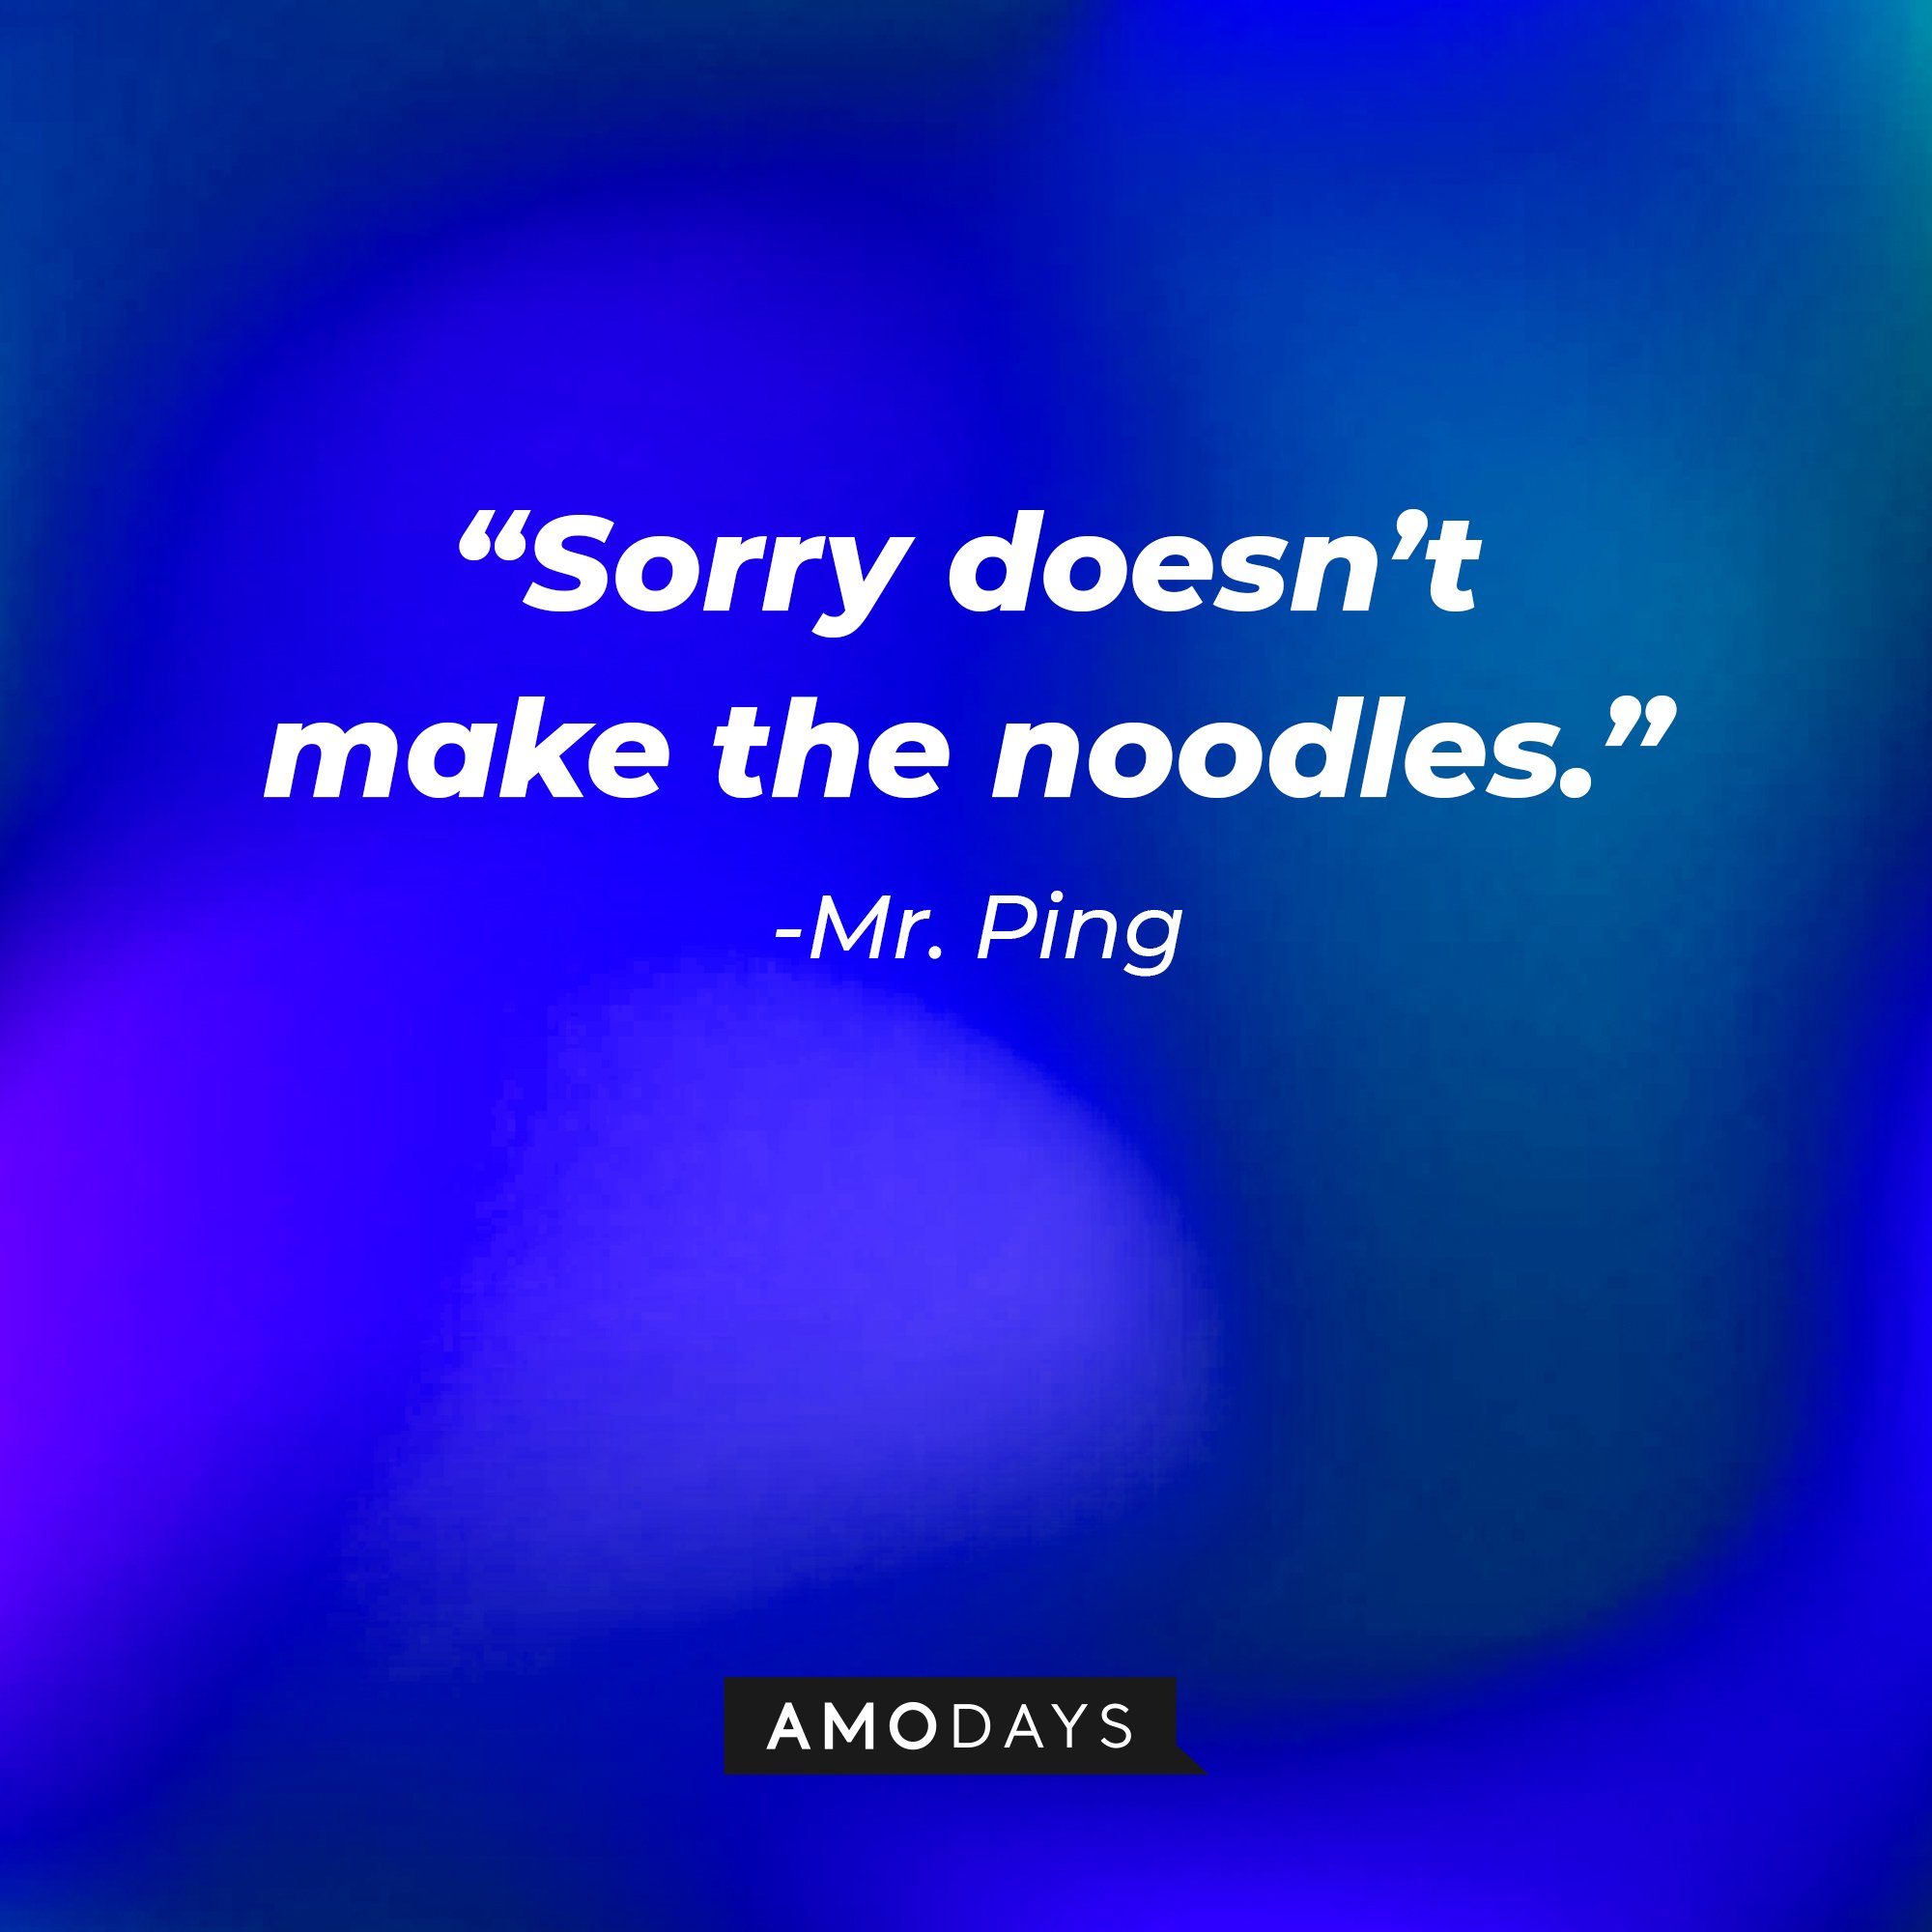 Mr. Ping's quote: “Sorry doesn’t make the noodles.” | Image: Amodays